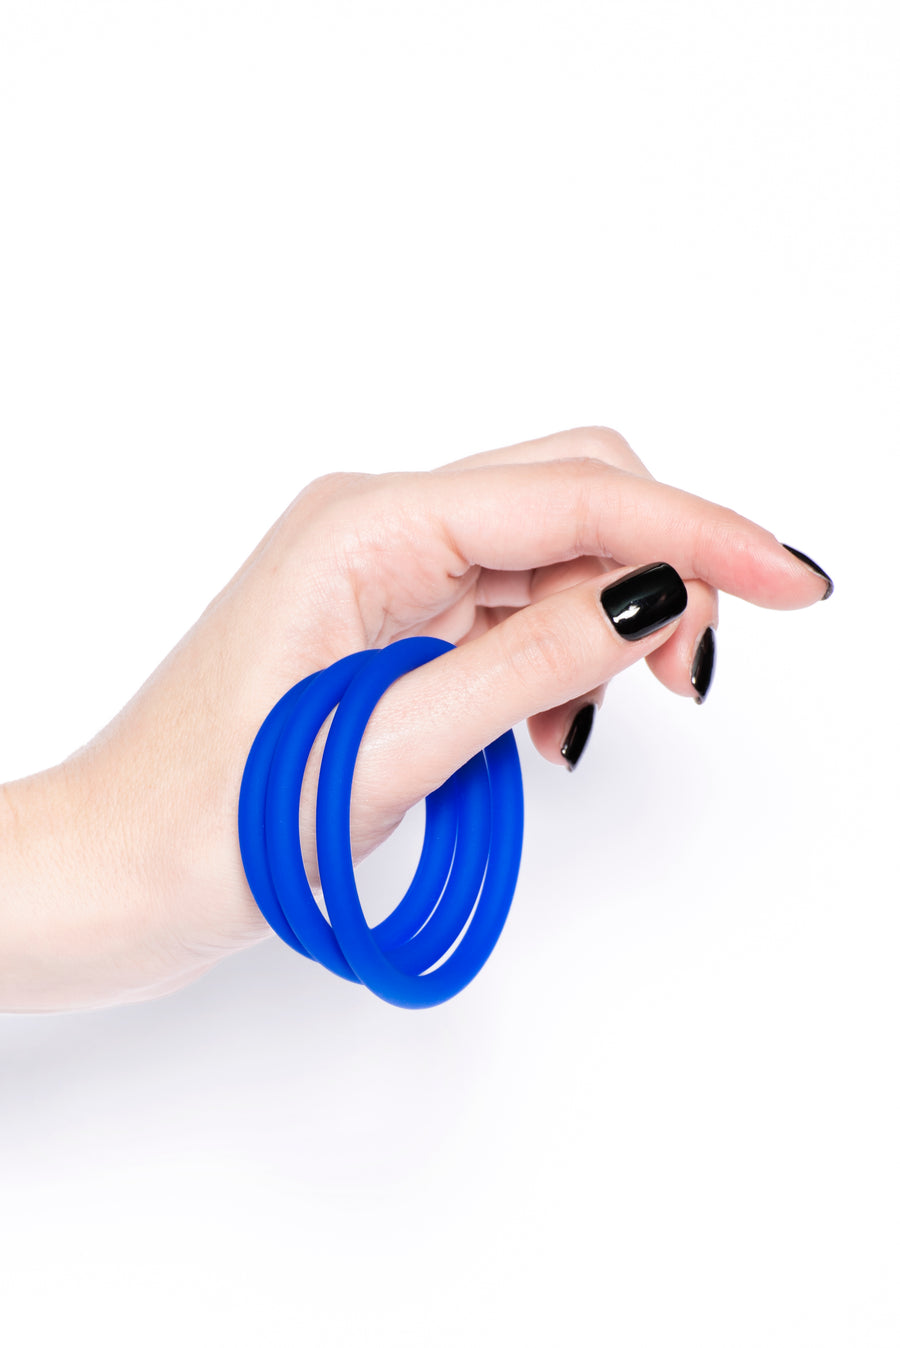 CLASSIC STRETCHY - SILICONE COCK RINGS